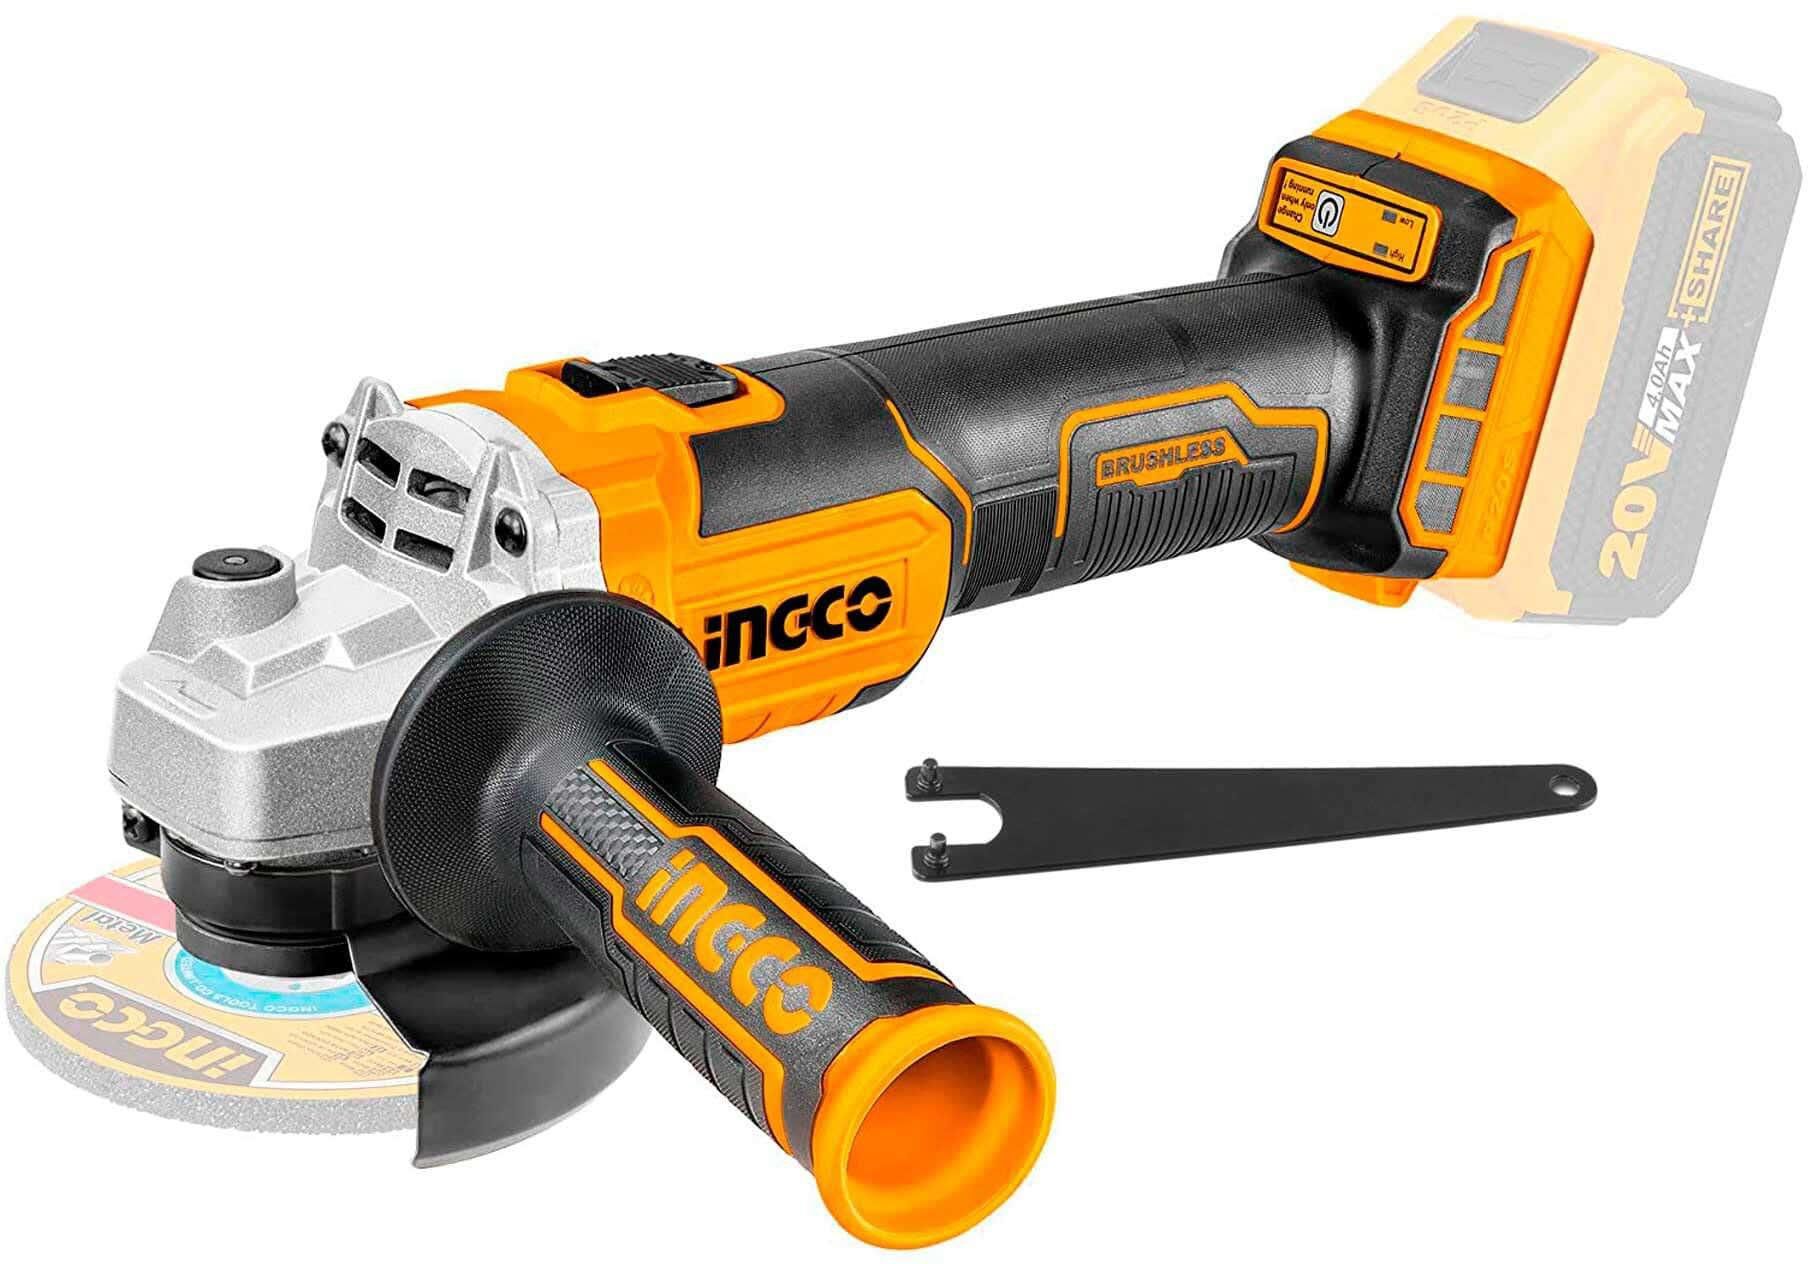 Get Ingco Cagli201158 Battery Angle Grinder, 20V, 115Mm Disc - Black Yellow with best offers | Raneen.com